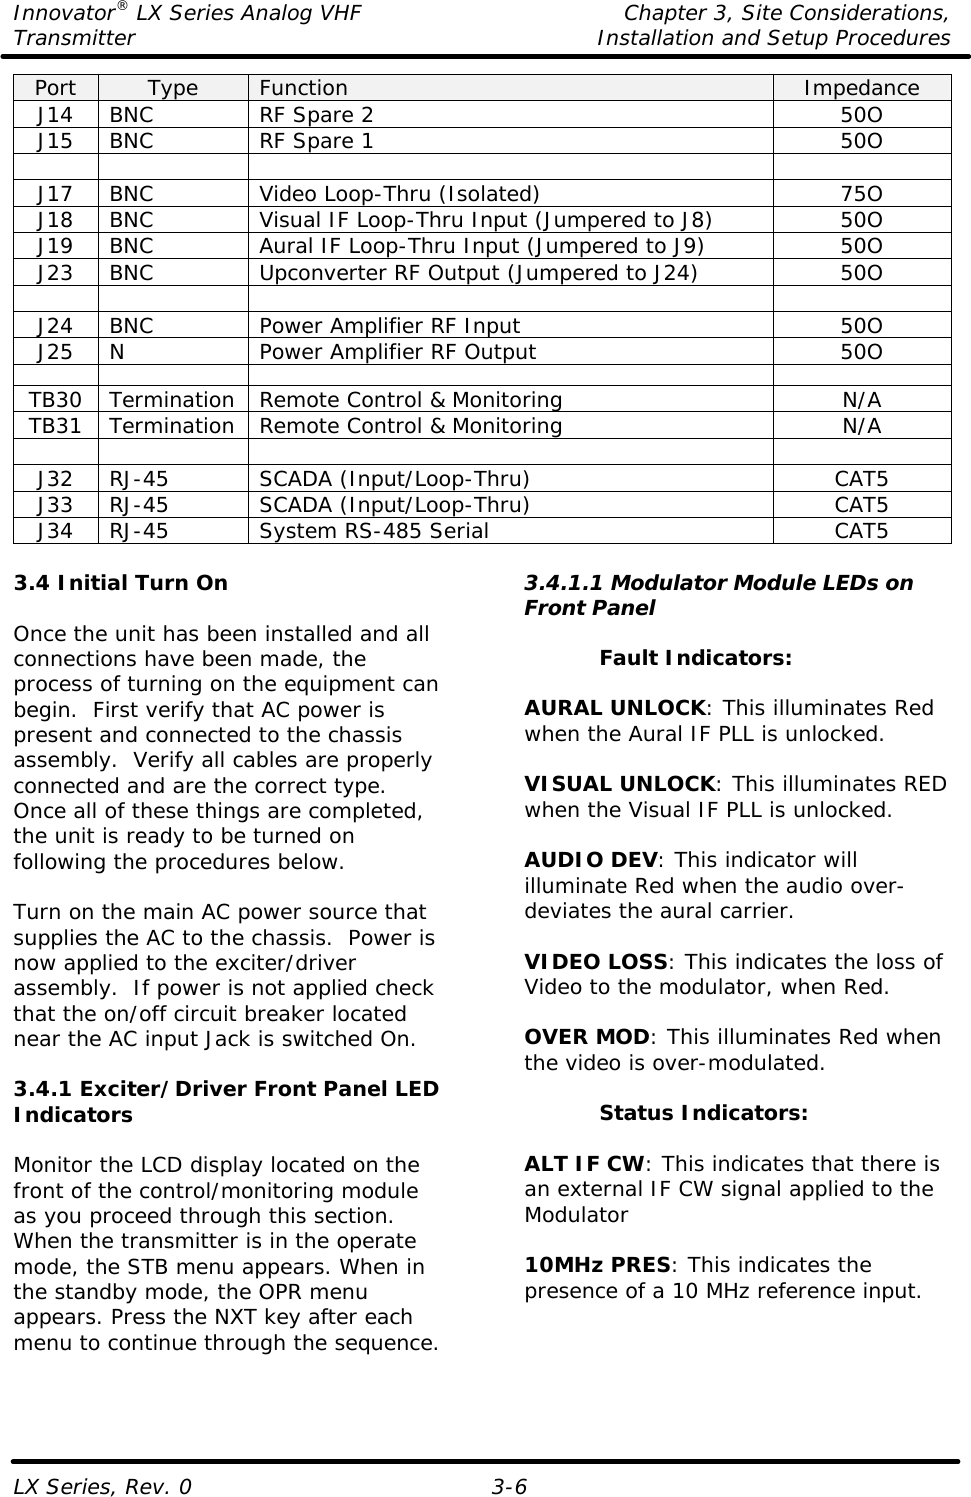 Innovator® LX Series Analog VHF    Chapter 3, Site Considerations, Transmitter Installation and Setup Procedures LX Series, Rev. 0  3-6 Port Type Function Impedance J14 BNC RF Spare 2 50O J15 BNC RF Spare 1 50O        J17 BNC Video Loop-Thru (Isolated) 75O J18 BNC Visual IF Loop-Thru Input (Jumpered to J8) 50O J19 BNC Aural IF Loop-Thru Input (Jumpered to J9) 50O J23 BNC Upconverter RF Output (Jumpered to J24) 50O        J24 BNC Power Amplifier RF Input 50O J25 N Power Amplifier RF Output 50O        TB30 Termination Remote Control &amp; Monitoring N/A TB31 Termination Remote Control &amp; Monitoring N/A        J32 RJ-45 SCADA (Input/Loop-Thru) CAT5 J33 RJ-45 SCADA (Input/Loop-Thru) CAT5 J34 RJ-45 System RS-485 Serial CAT5  3.4 Initial Turn On  Once the unit has been installed and all connections have been made, the process of turning on the equipment can begin.  First verify that AC power is present and connected to the chassis assembly.  Verify all cables are properly connected and are the correct type. Once all of these things are completed, the unit is ready to be turned on following the procedures below.  Turn on the main AC power source that supplies the AC to the chassis.  Power is now applied to the exciter/driver assembly.  If power is not applied check that the on/off circuit breaker located near the AC input Jack is switched On.  3.4.1 Exciter/Driver Front Panel LED Indicators  Monitor the LCD display located on the front of the control/monitoring module as you proceed through this section.  When the transmitter is in the operate mode, the STB menu appears. When in the standby mode, the OPR menu appears. Press the NXT key after each menu to continue through the sequence.  3.4.1.1 Modulator Module LEDs on Front Panel  Fault Indicators:  AURAL UNLOCK: This illuminates Red when the Aural IF PLL is unlocked.  VISUAL UNLOCK: This illuminates RED when the Visual IF PLL is unlocked.  AUDIO DEV: This indicator will illuminate Red when the audio over-deviates the aural carrier.  VIDEO LOSS: This indicates the loss of Video to the modulator, when Red.  OVER MOD: This illuminates Red when the video is over-modulated.  Status Indicators:  ALT IF CW: This indicates that there is an external IF CW signal applied to the Modulator  10MHz PRES: This indicates the presence of a 10 MHz reference input. 